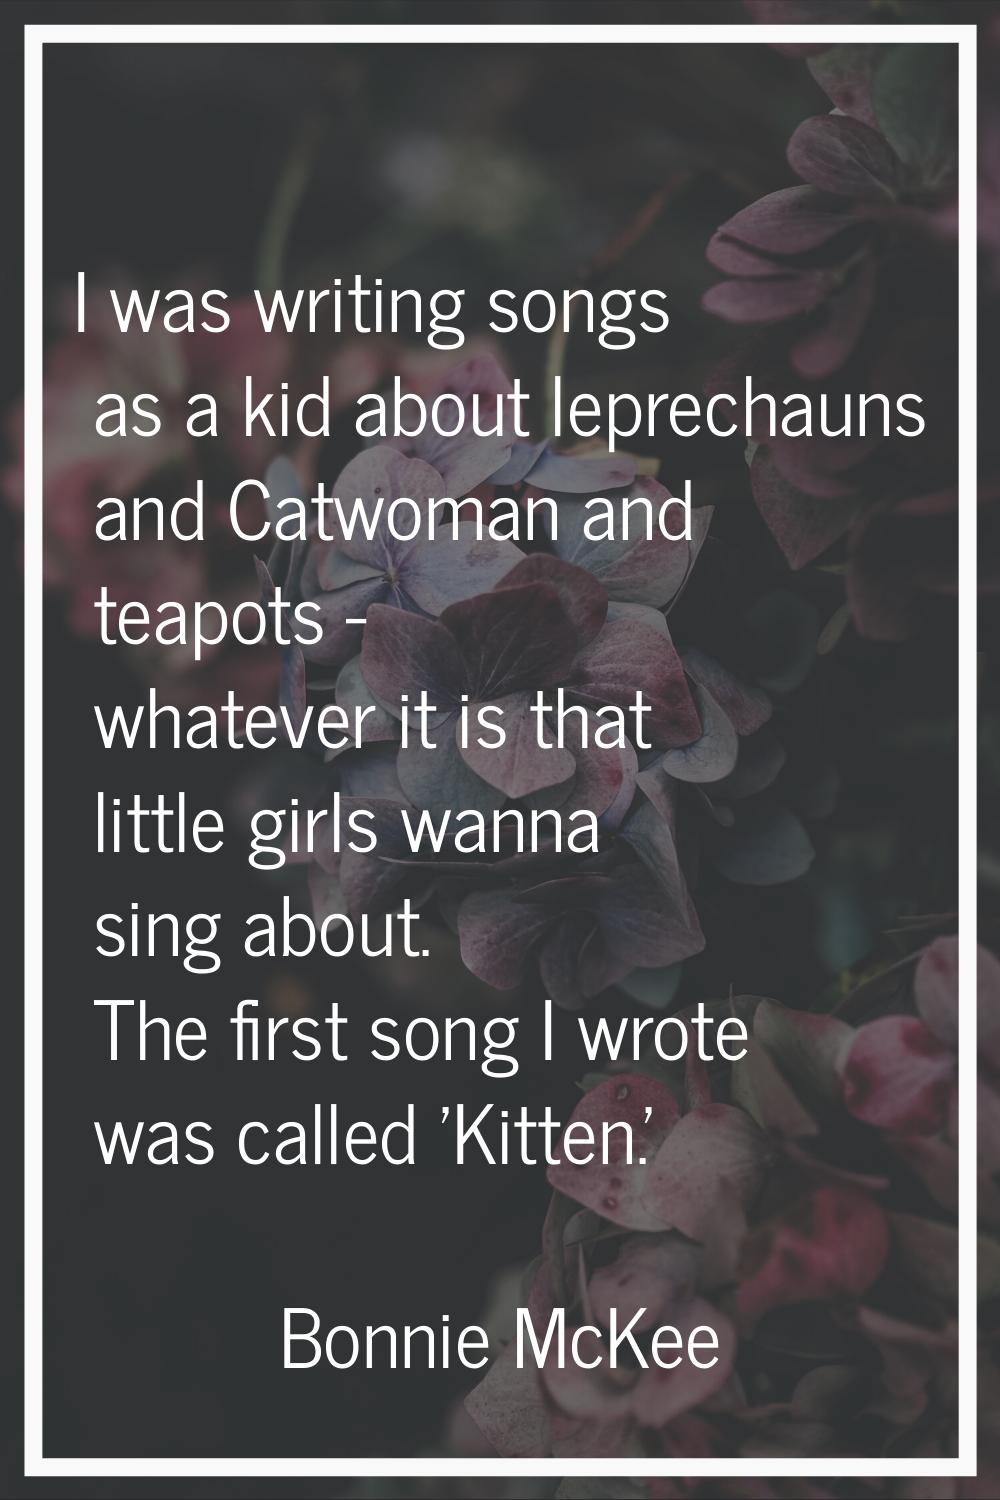 I was writing songs as a kid about leprechauns and Catwoman and teapots - whatever it is that littl